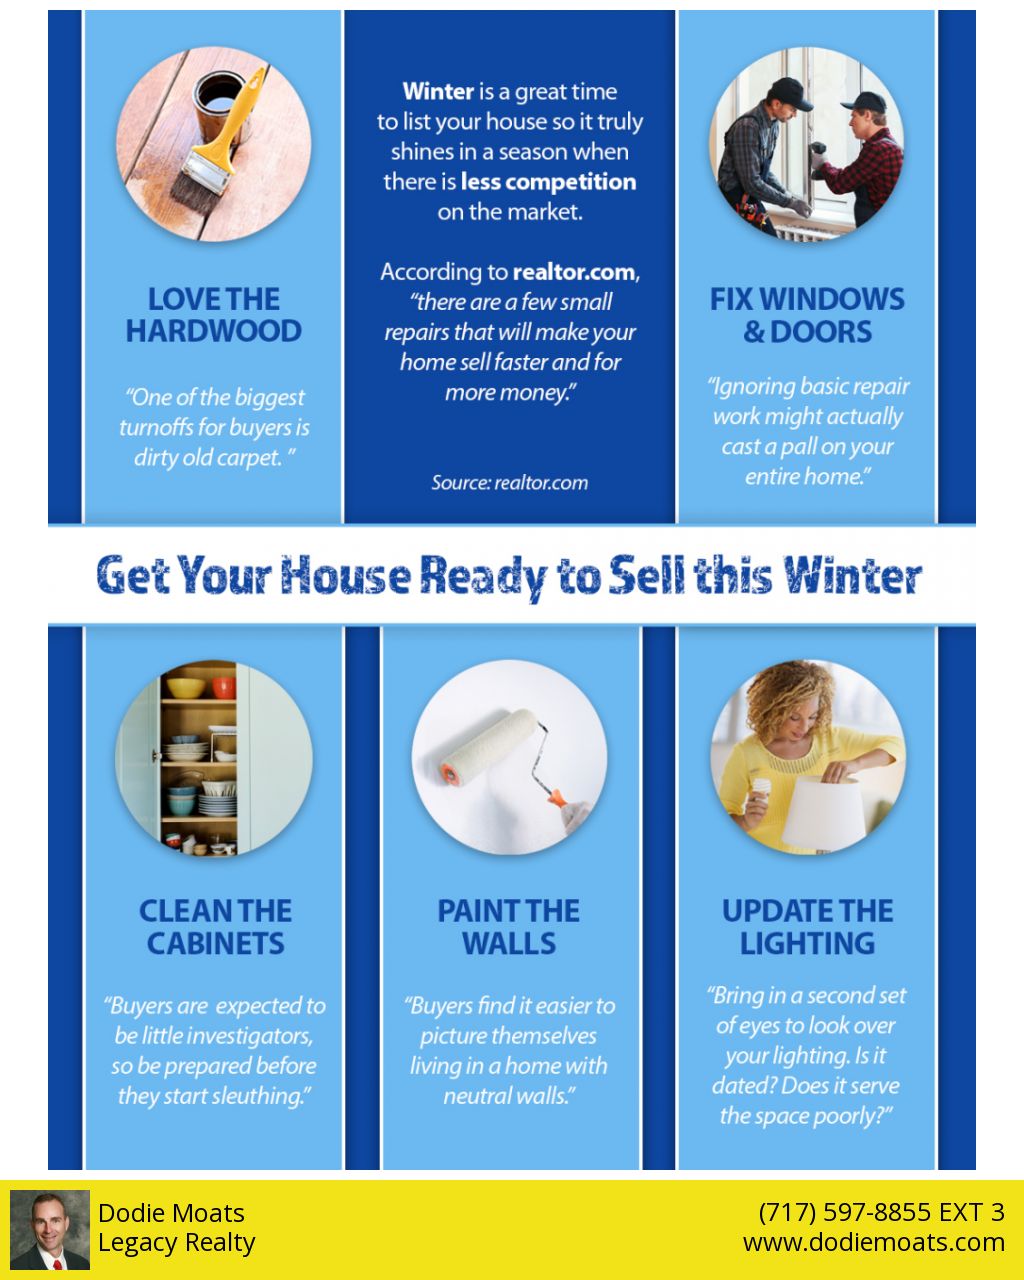 Get Your House Ready to Sell This Winter